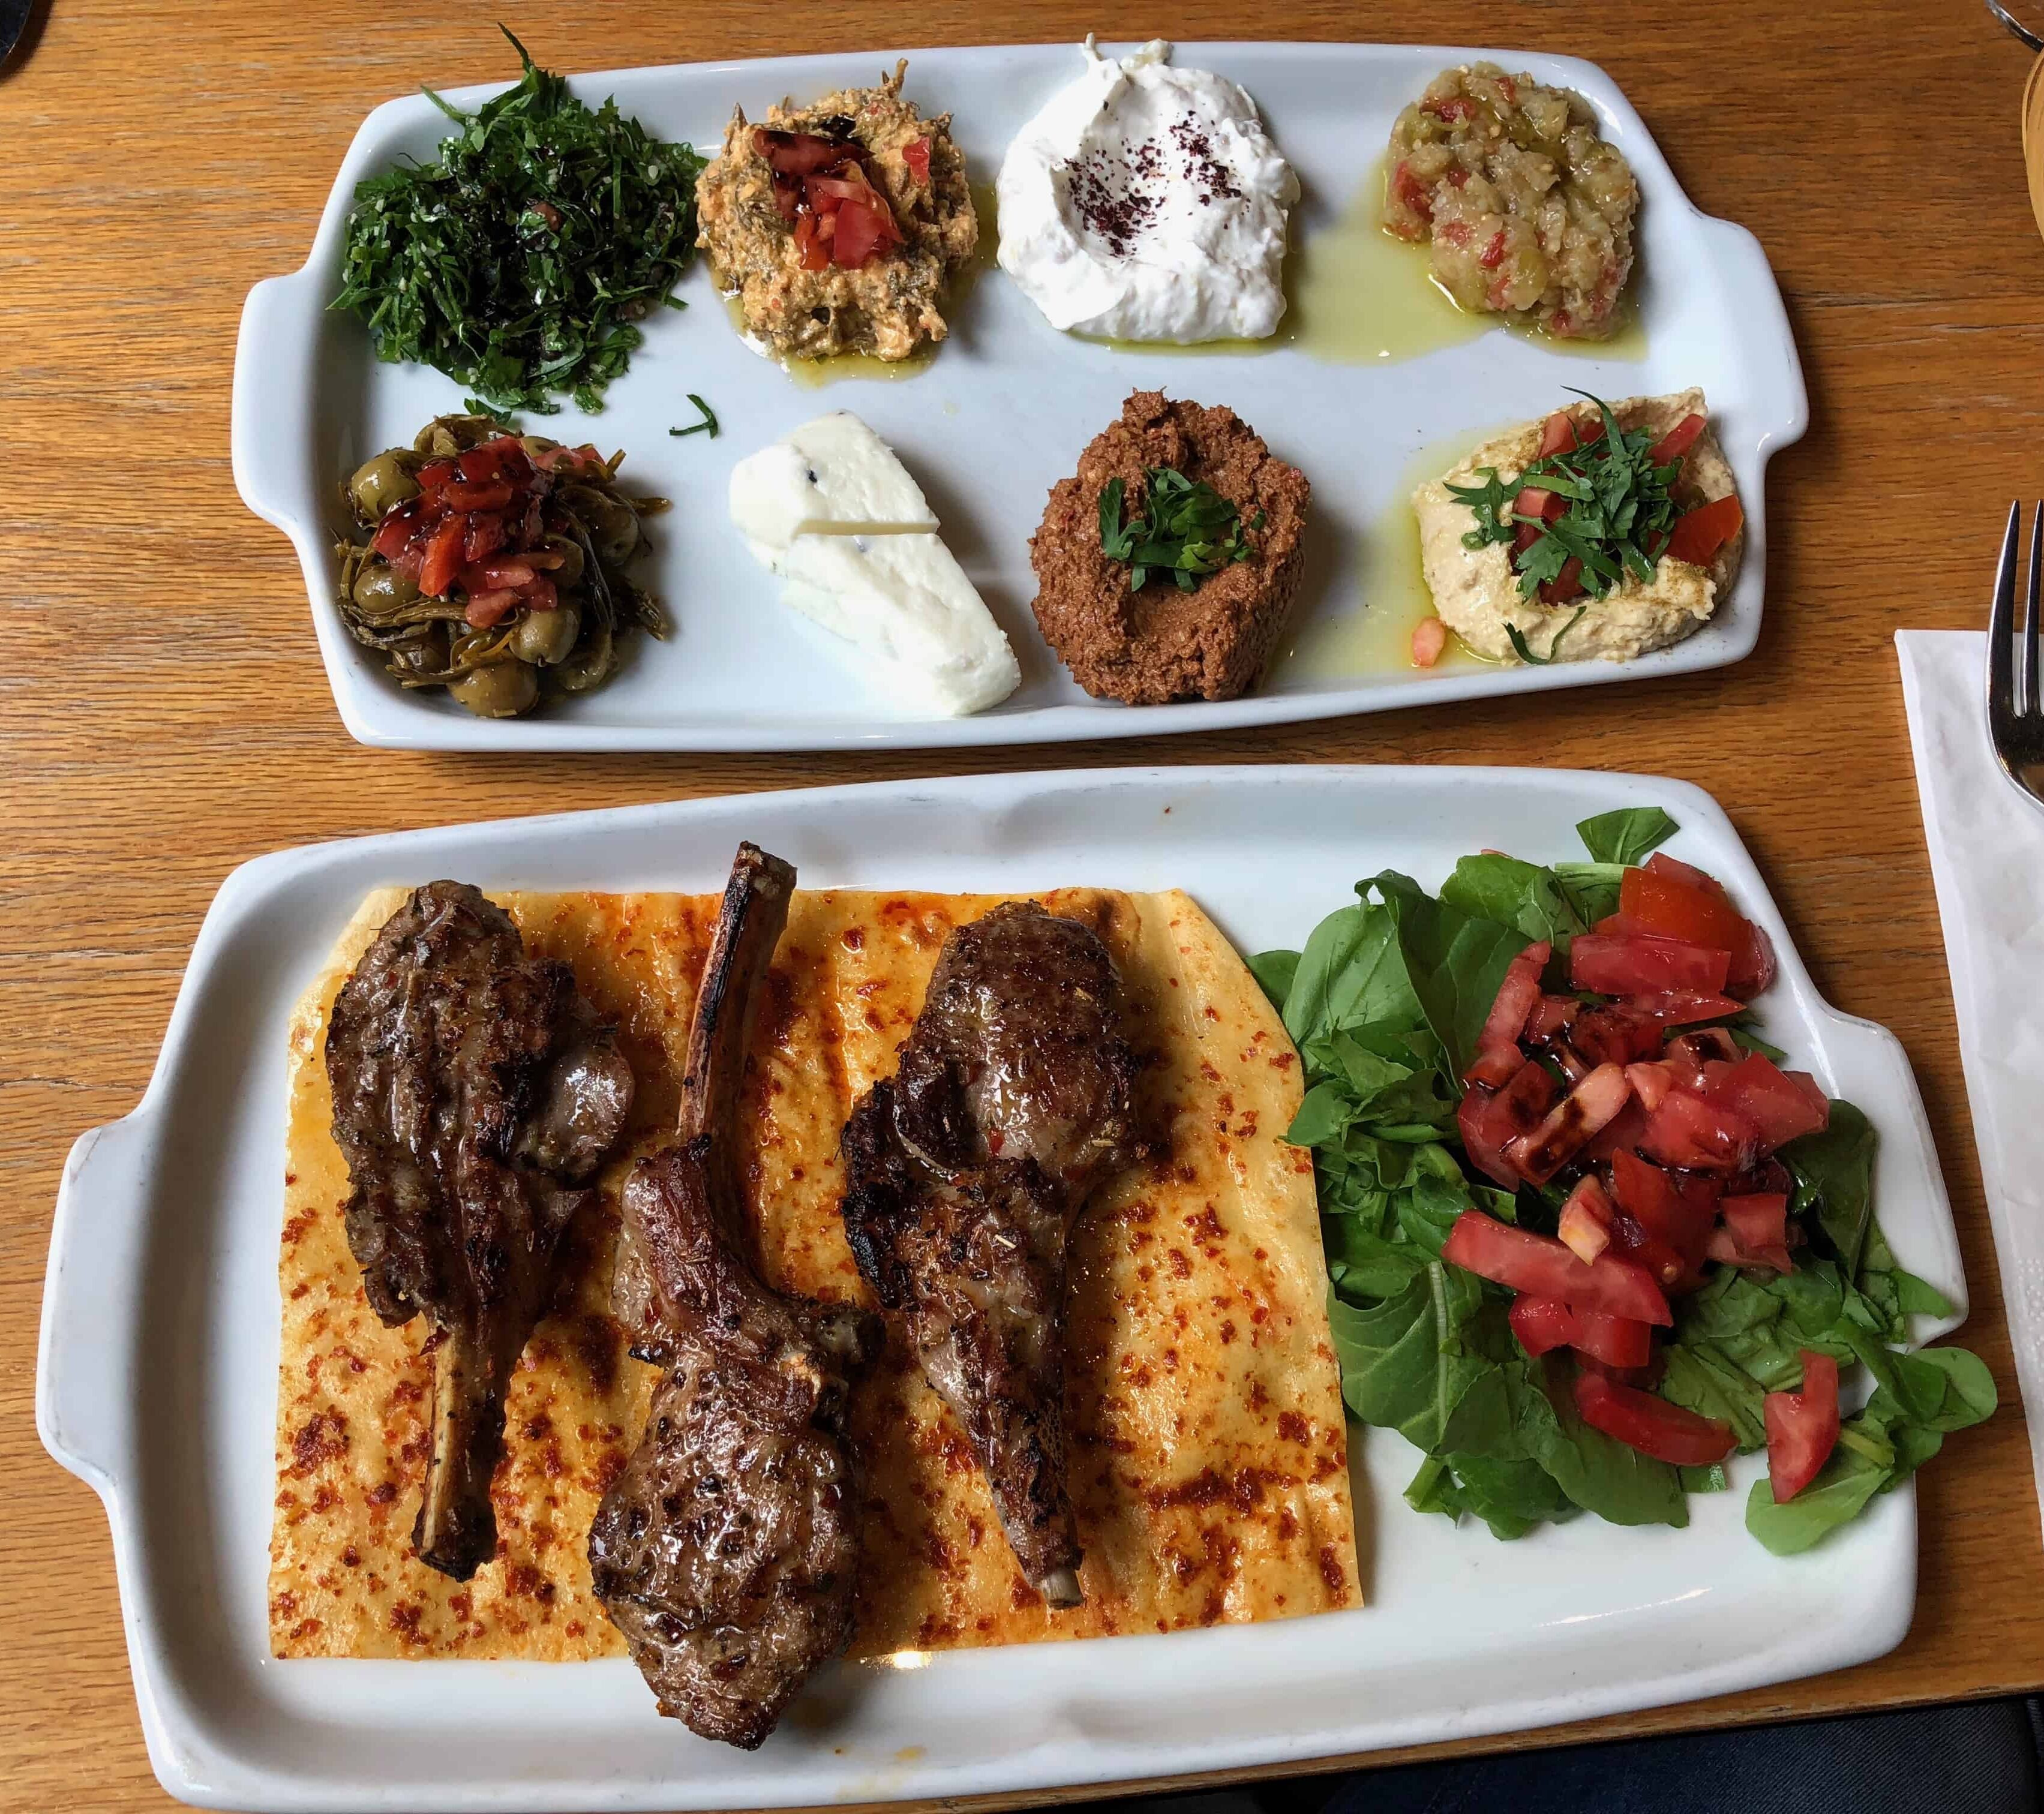 Lamb chops and spreads at Antiochia